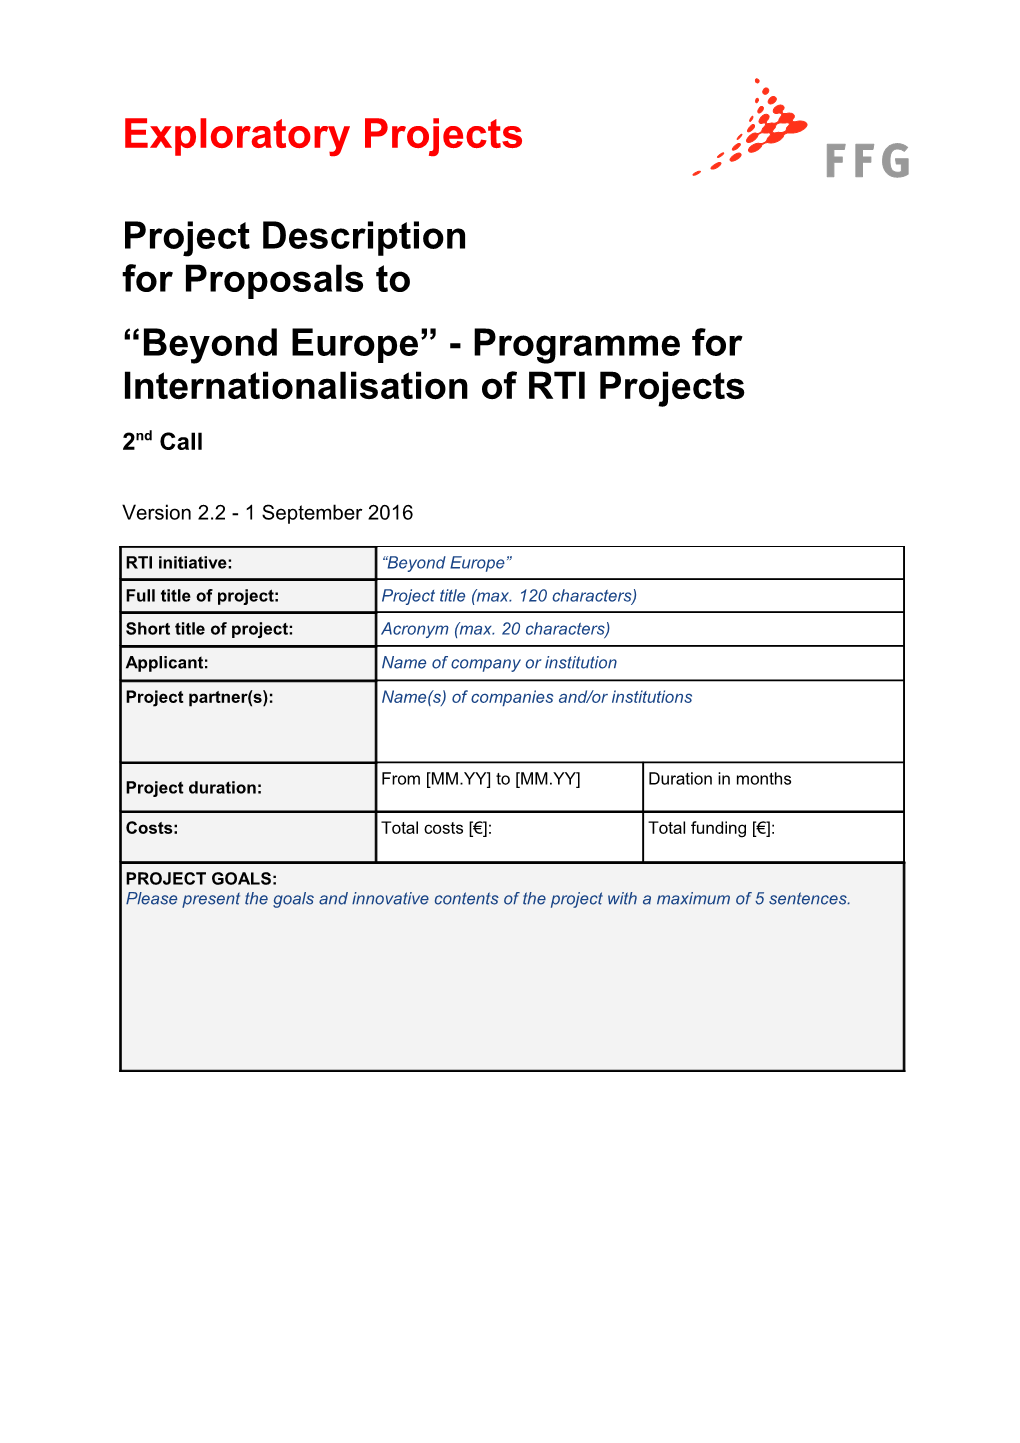 Beyond Europe - Programme for Internationalisation of RTI Projects